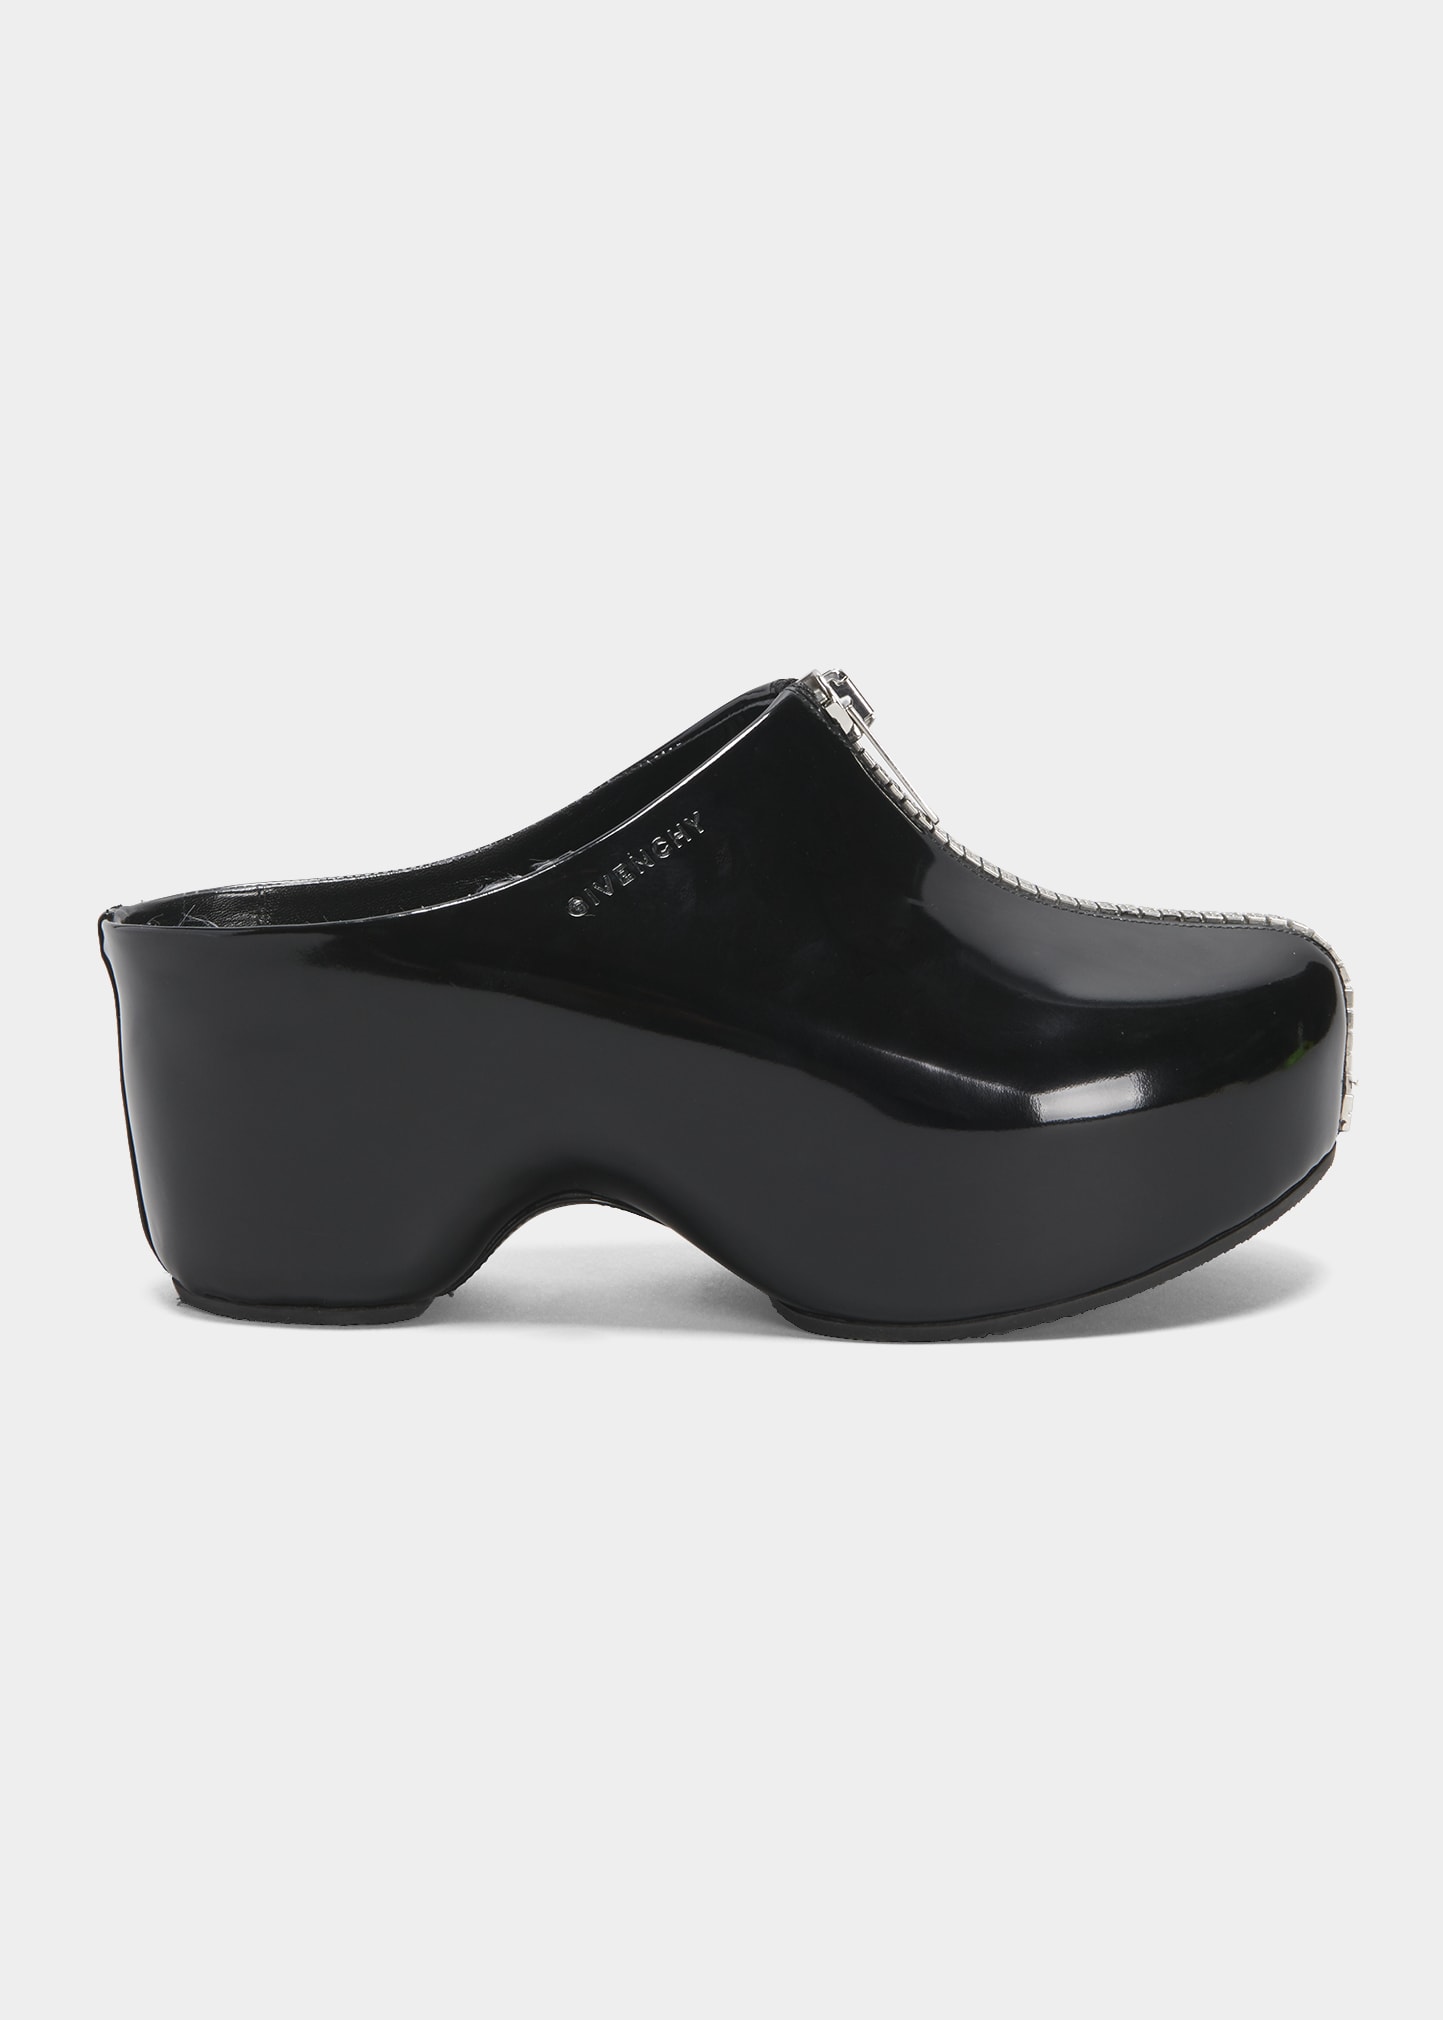 Givenchy G Patent Zip-Up Mule Clogs